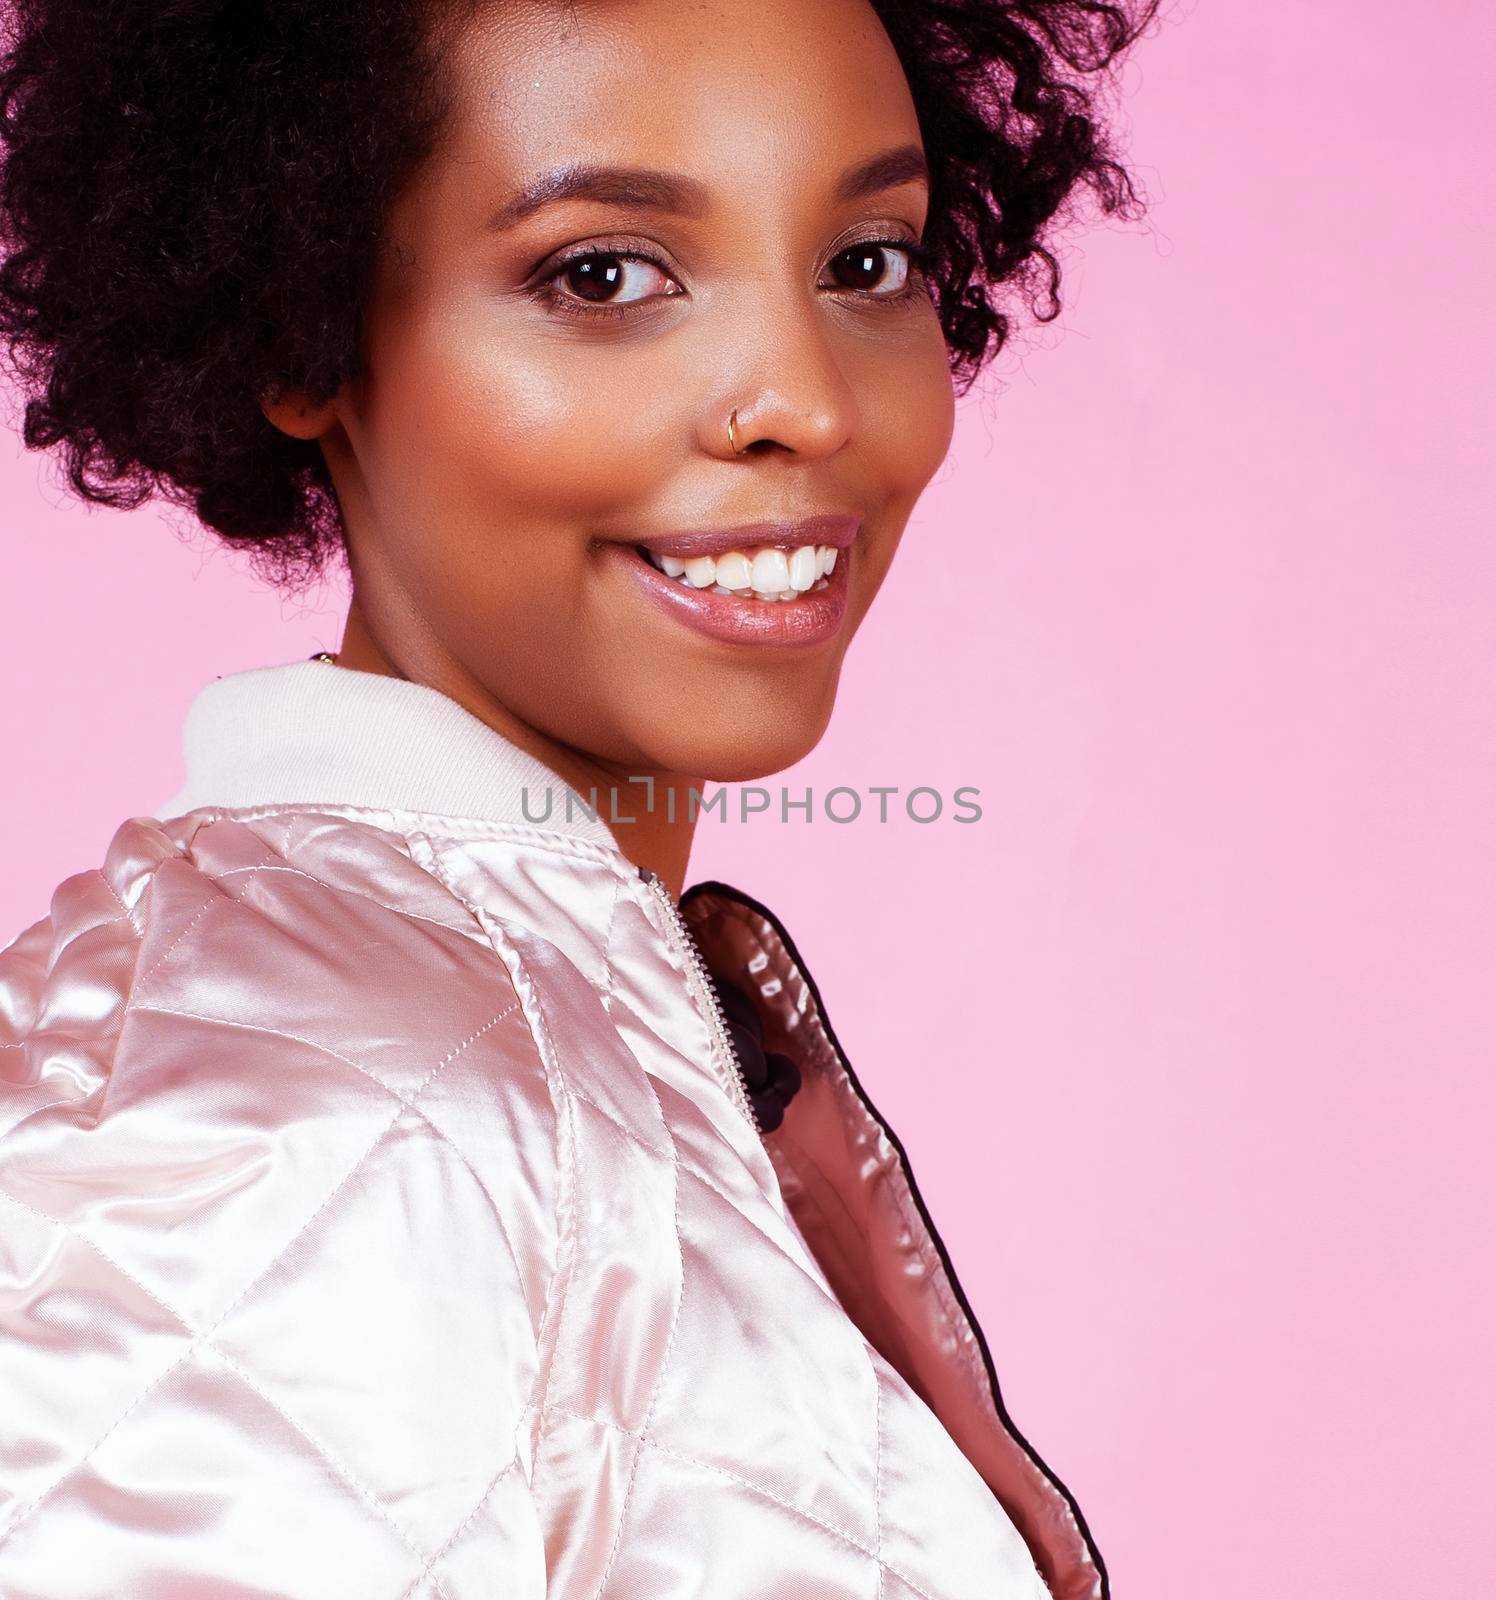 young pretty fashion styled african girl posing emotional cheerful on pink background, lifestyle people concept close up